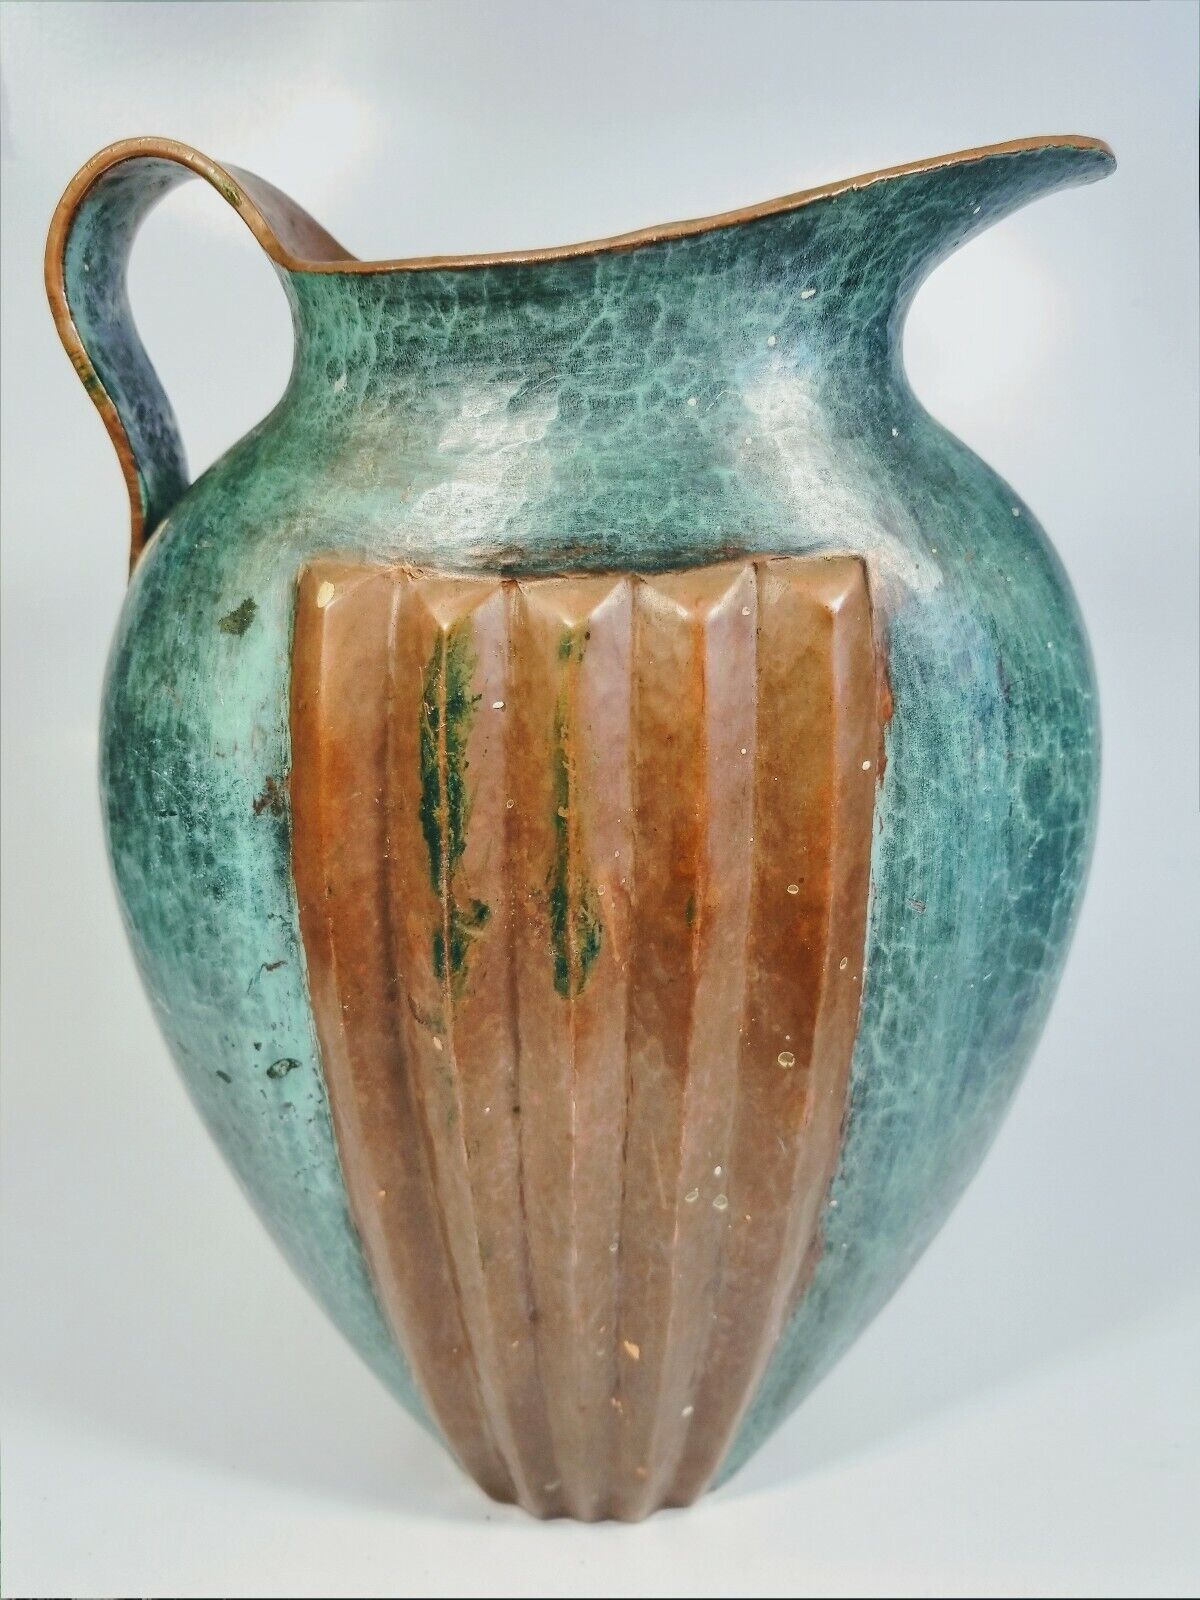 Mexican Artisan Hand-Crafted Bronze With Green Patina Watering Jug Pitcher